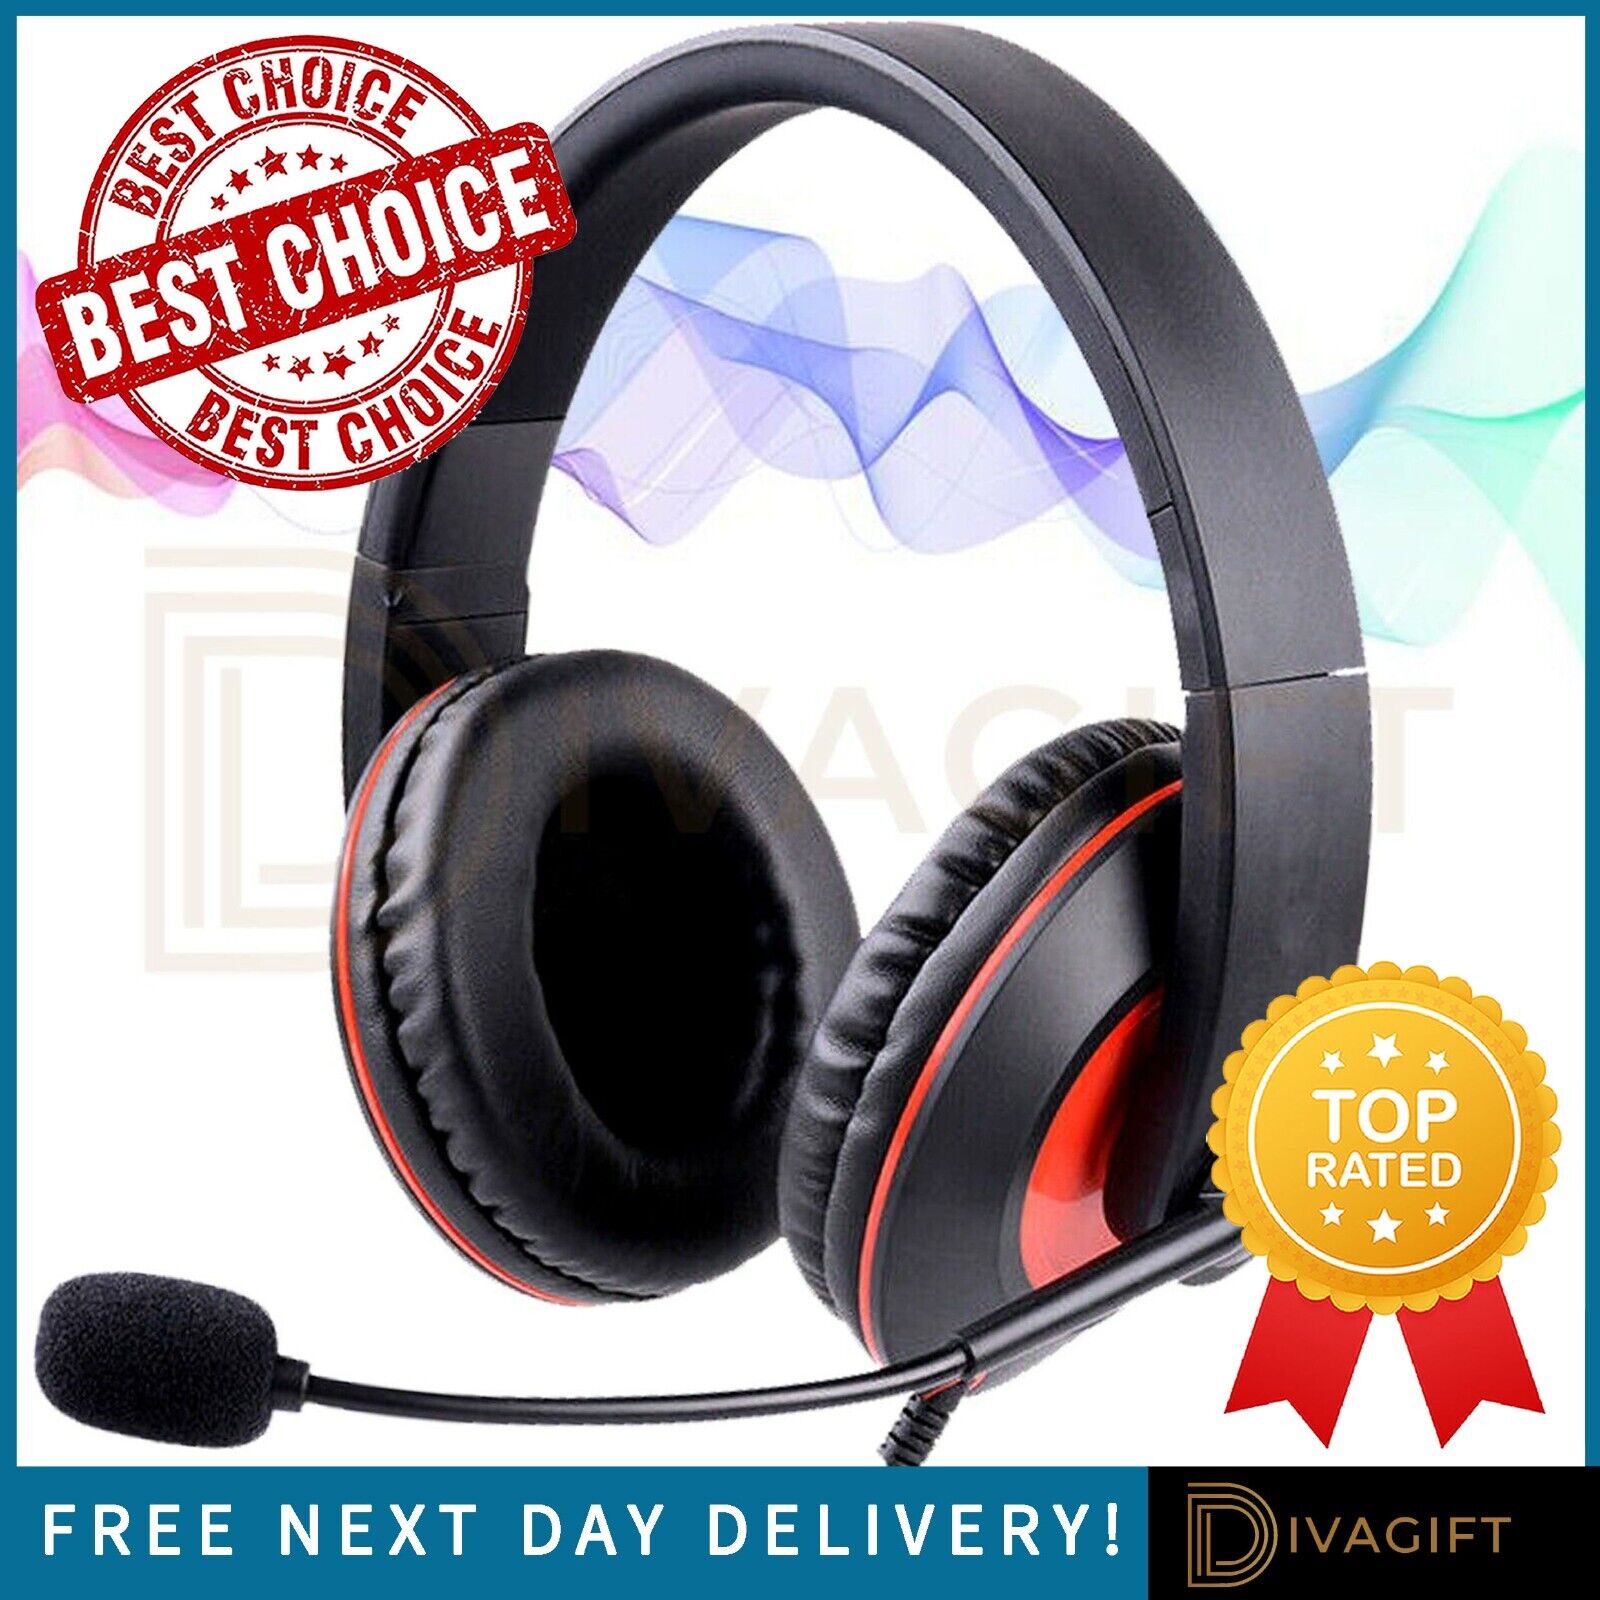 LED Gaming Headset with Microphone for Consoles and PC